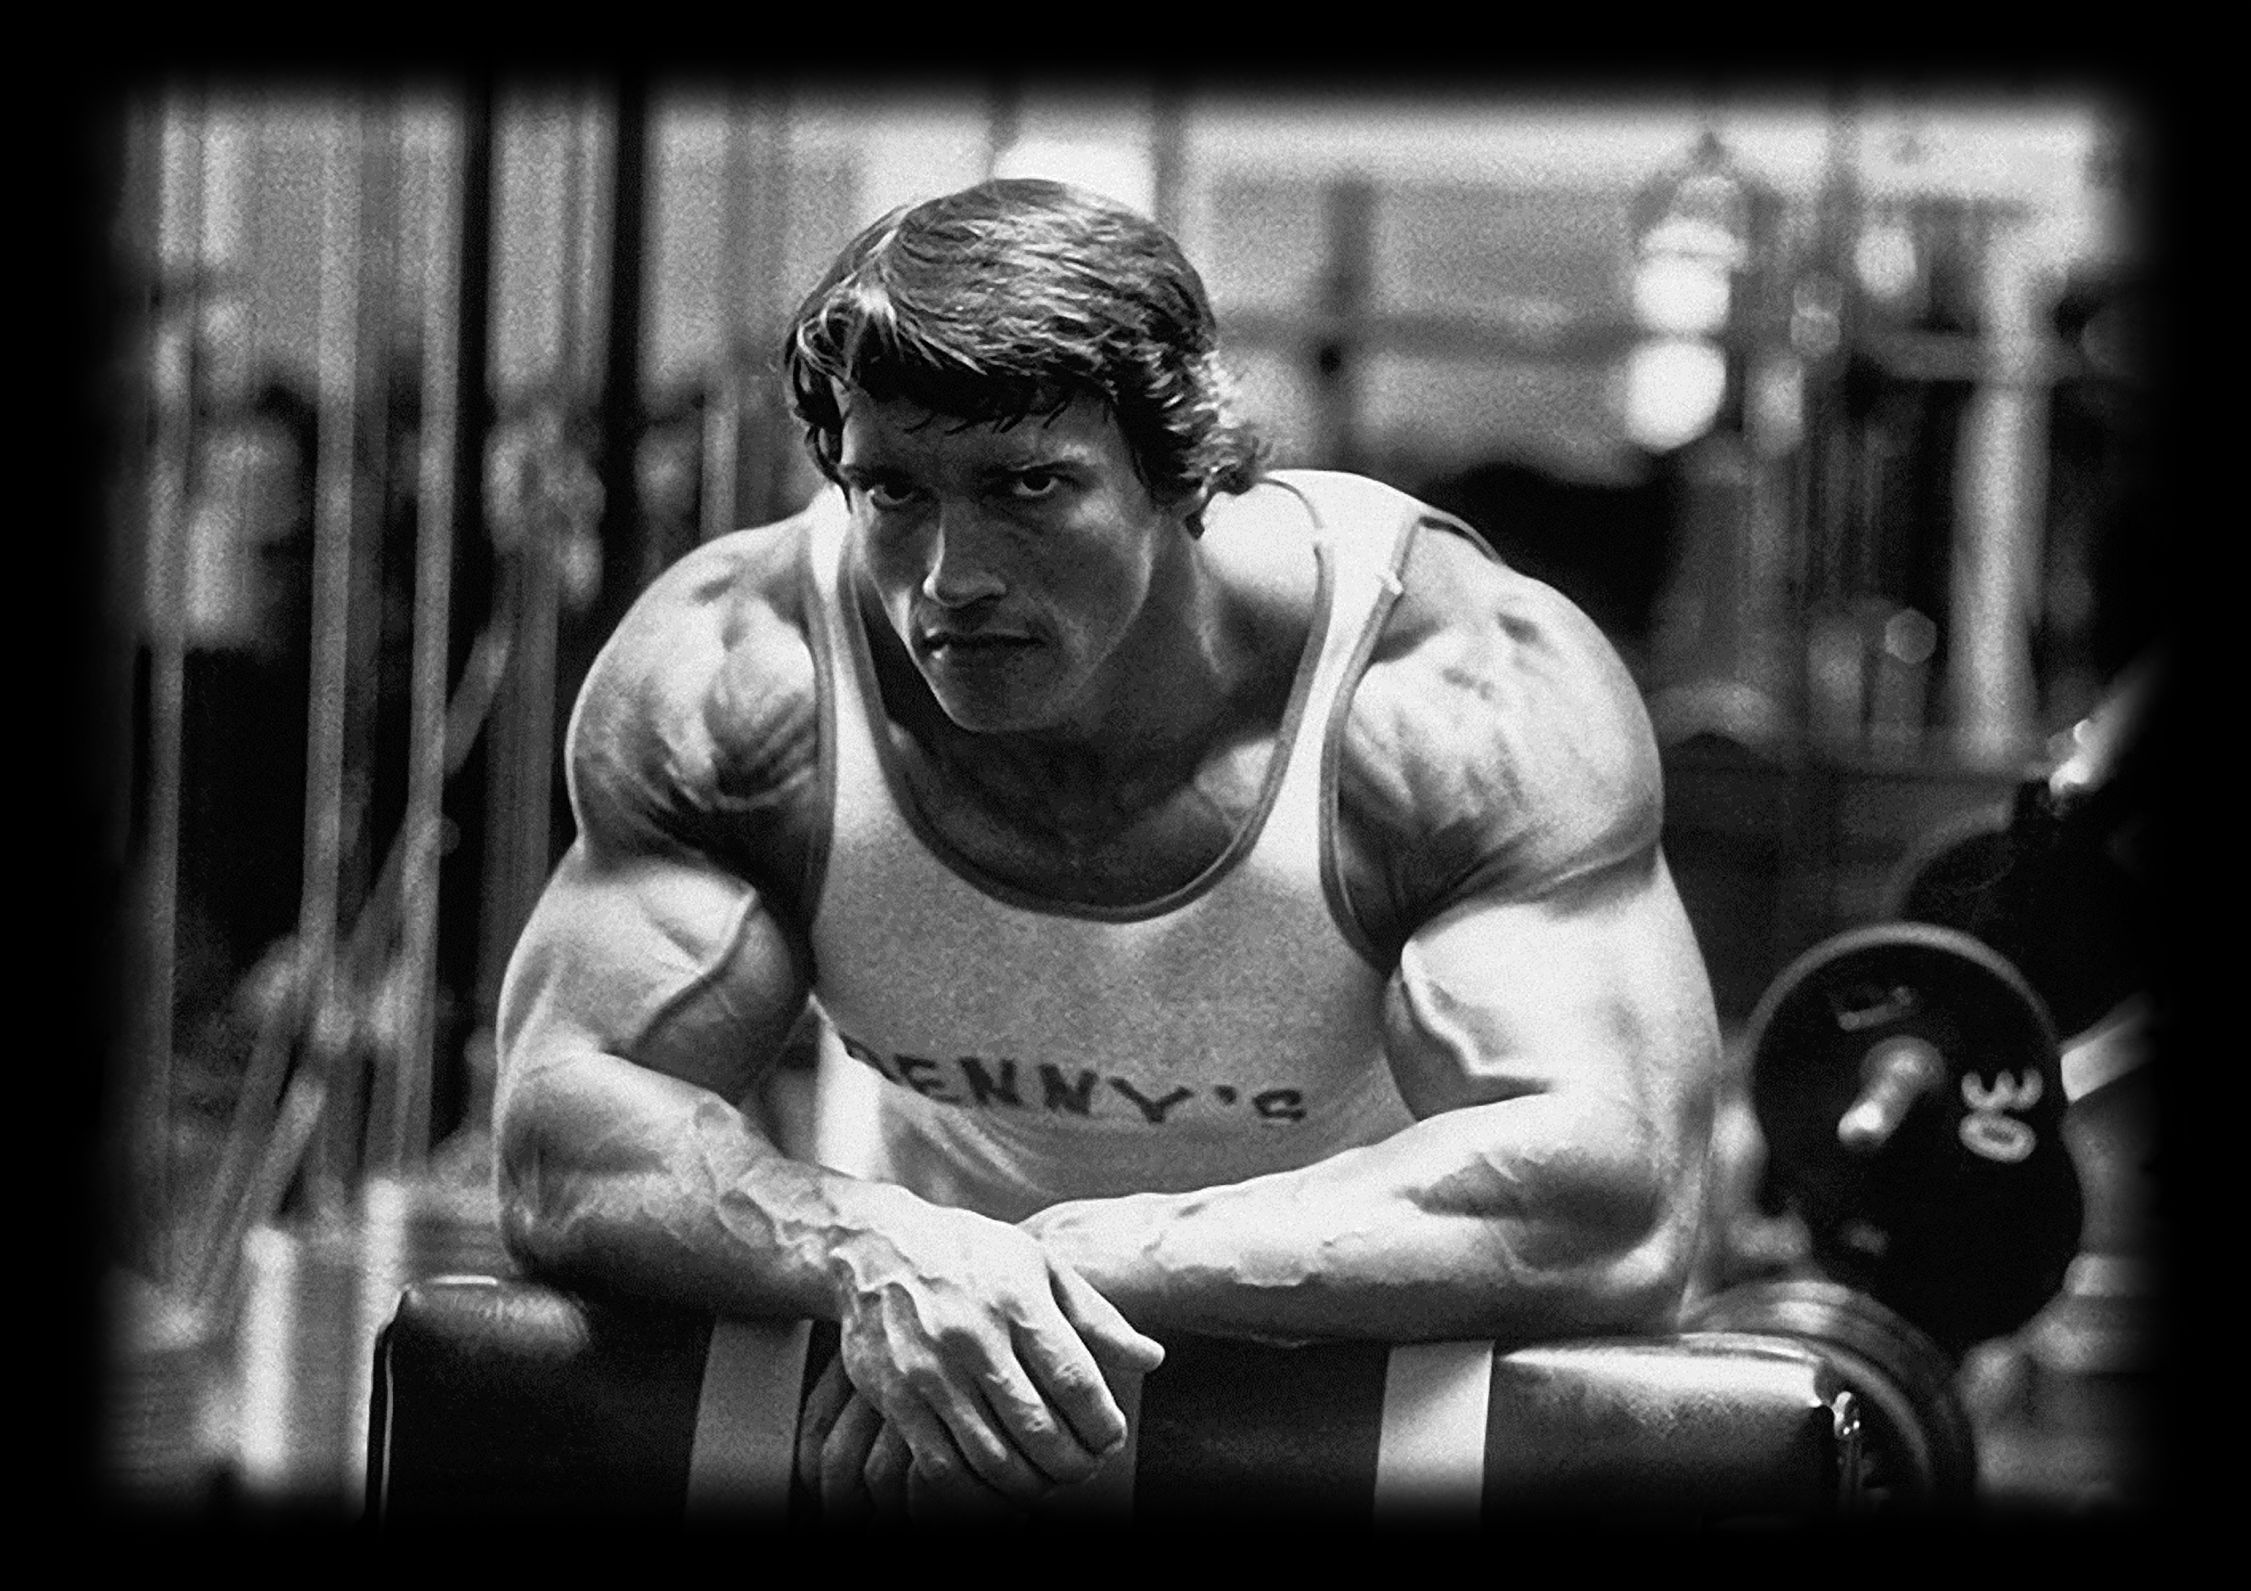 Arnold Schwarzenegger at Gym Leaning Over Bench B&W Photo Blank Meme Template